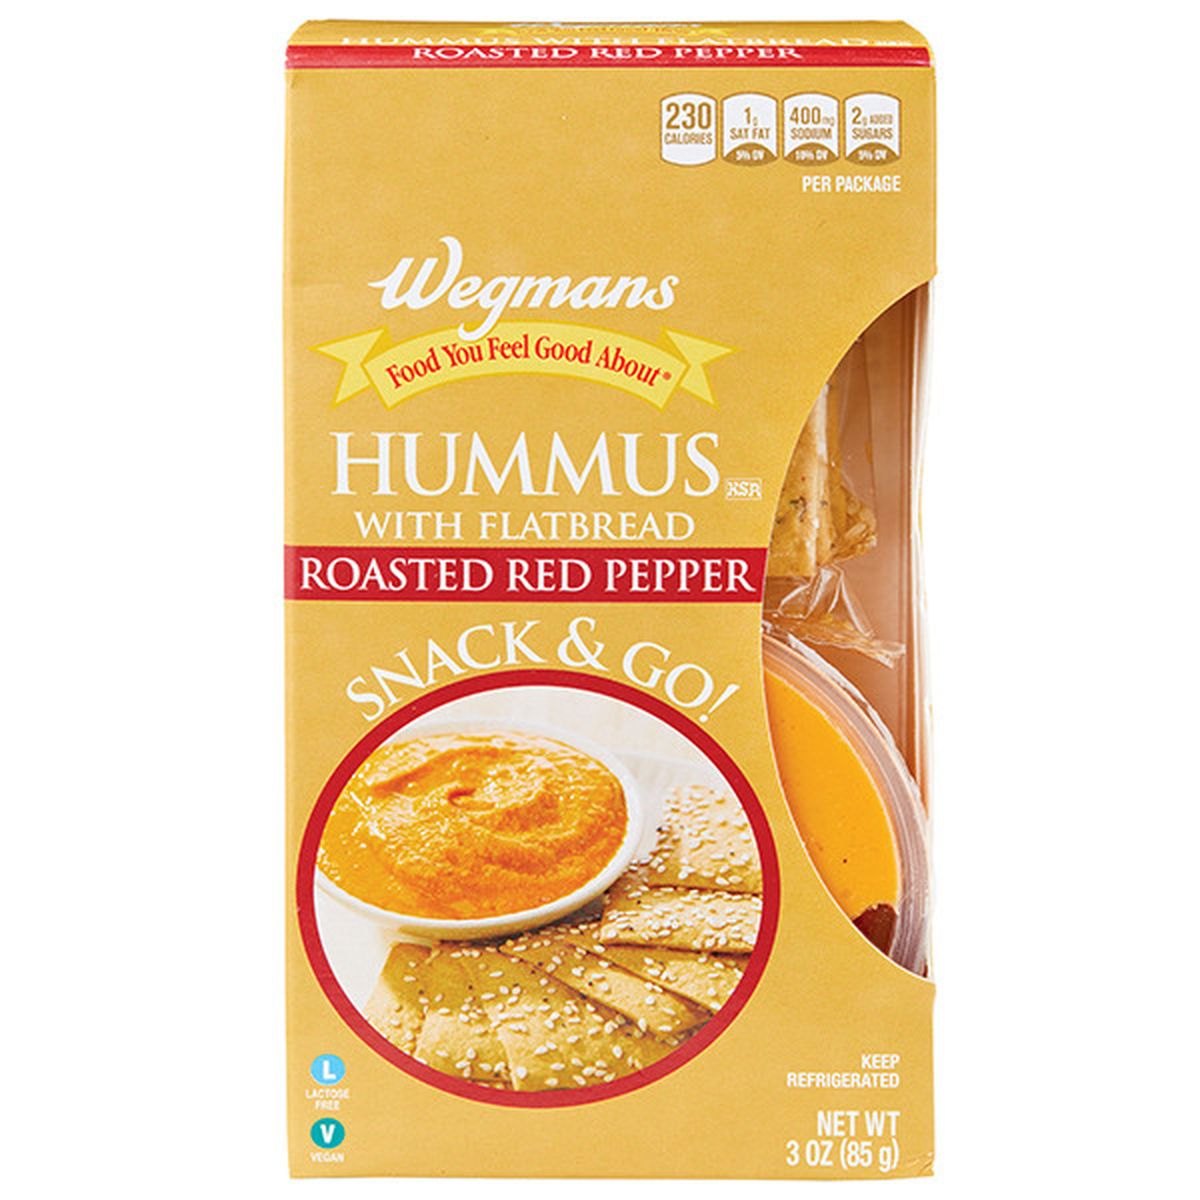 Calories in Wegmans Roasted Red Pepper Hummus with Flatbread, Snack Pack